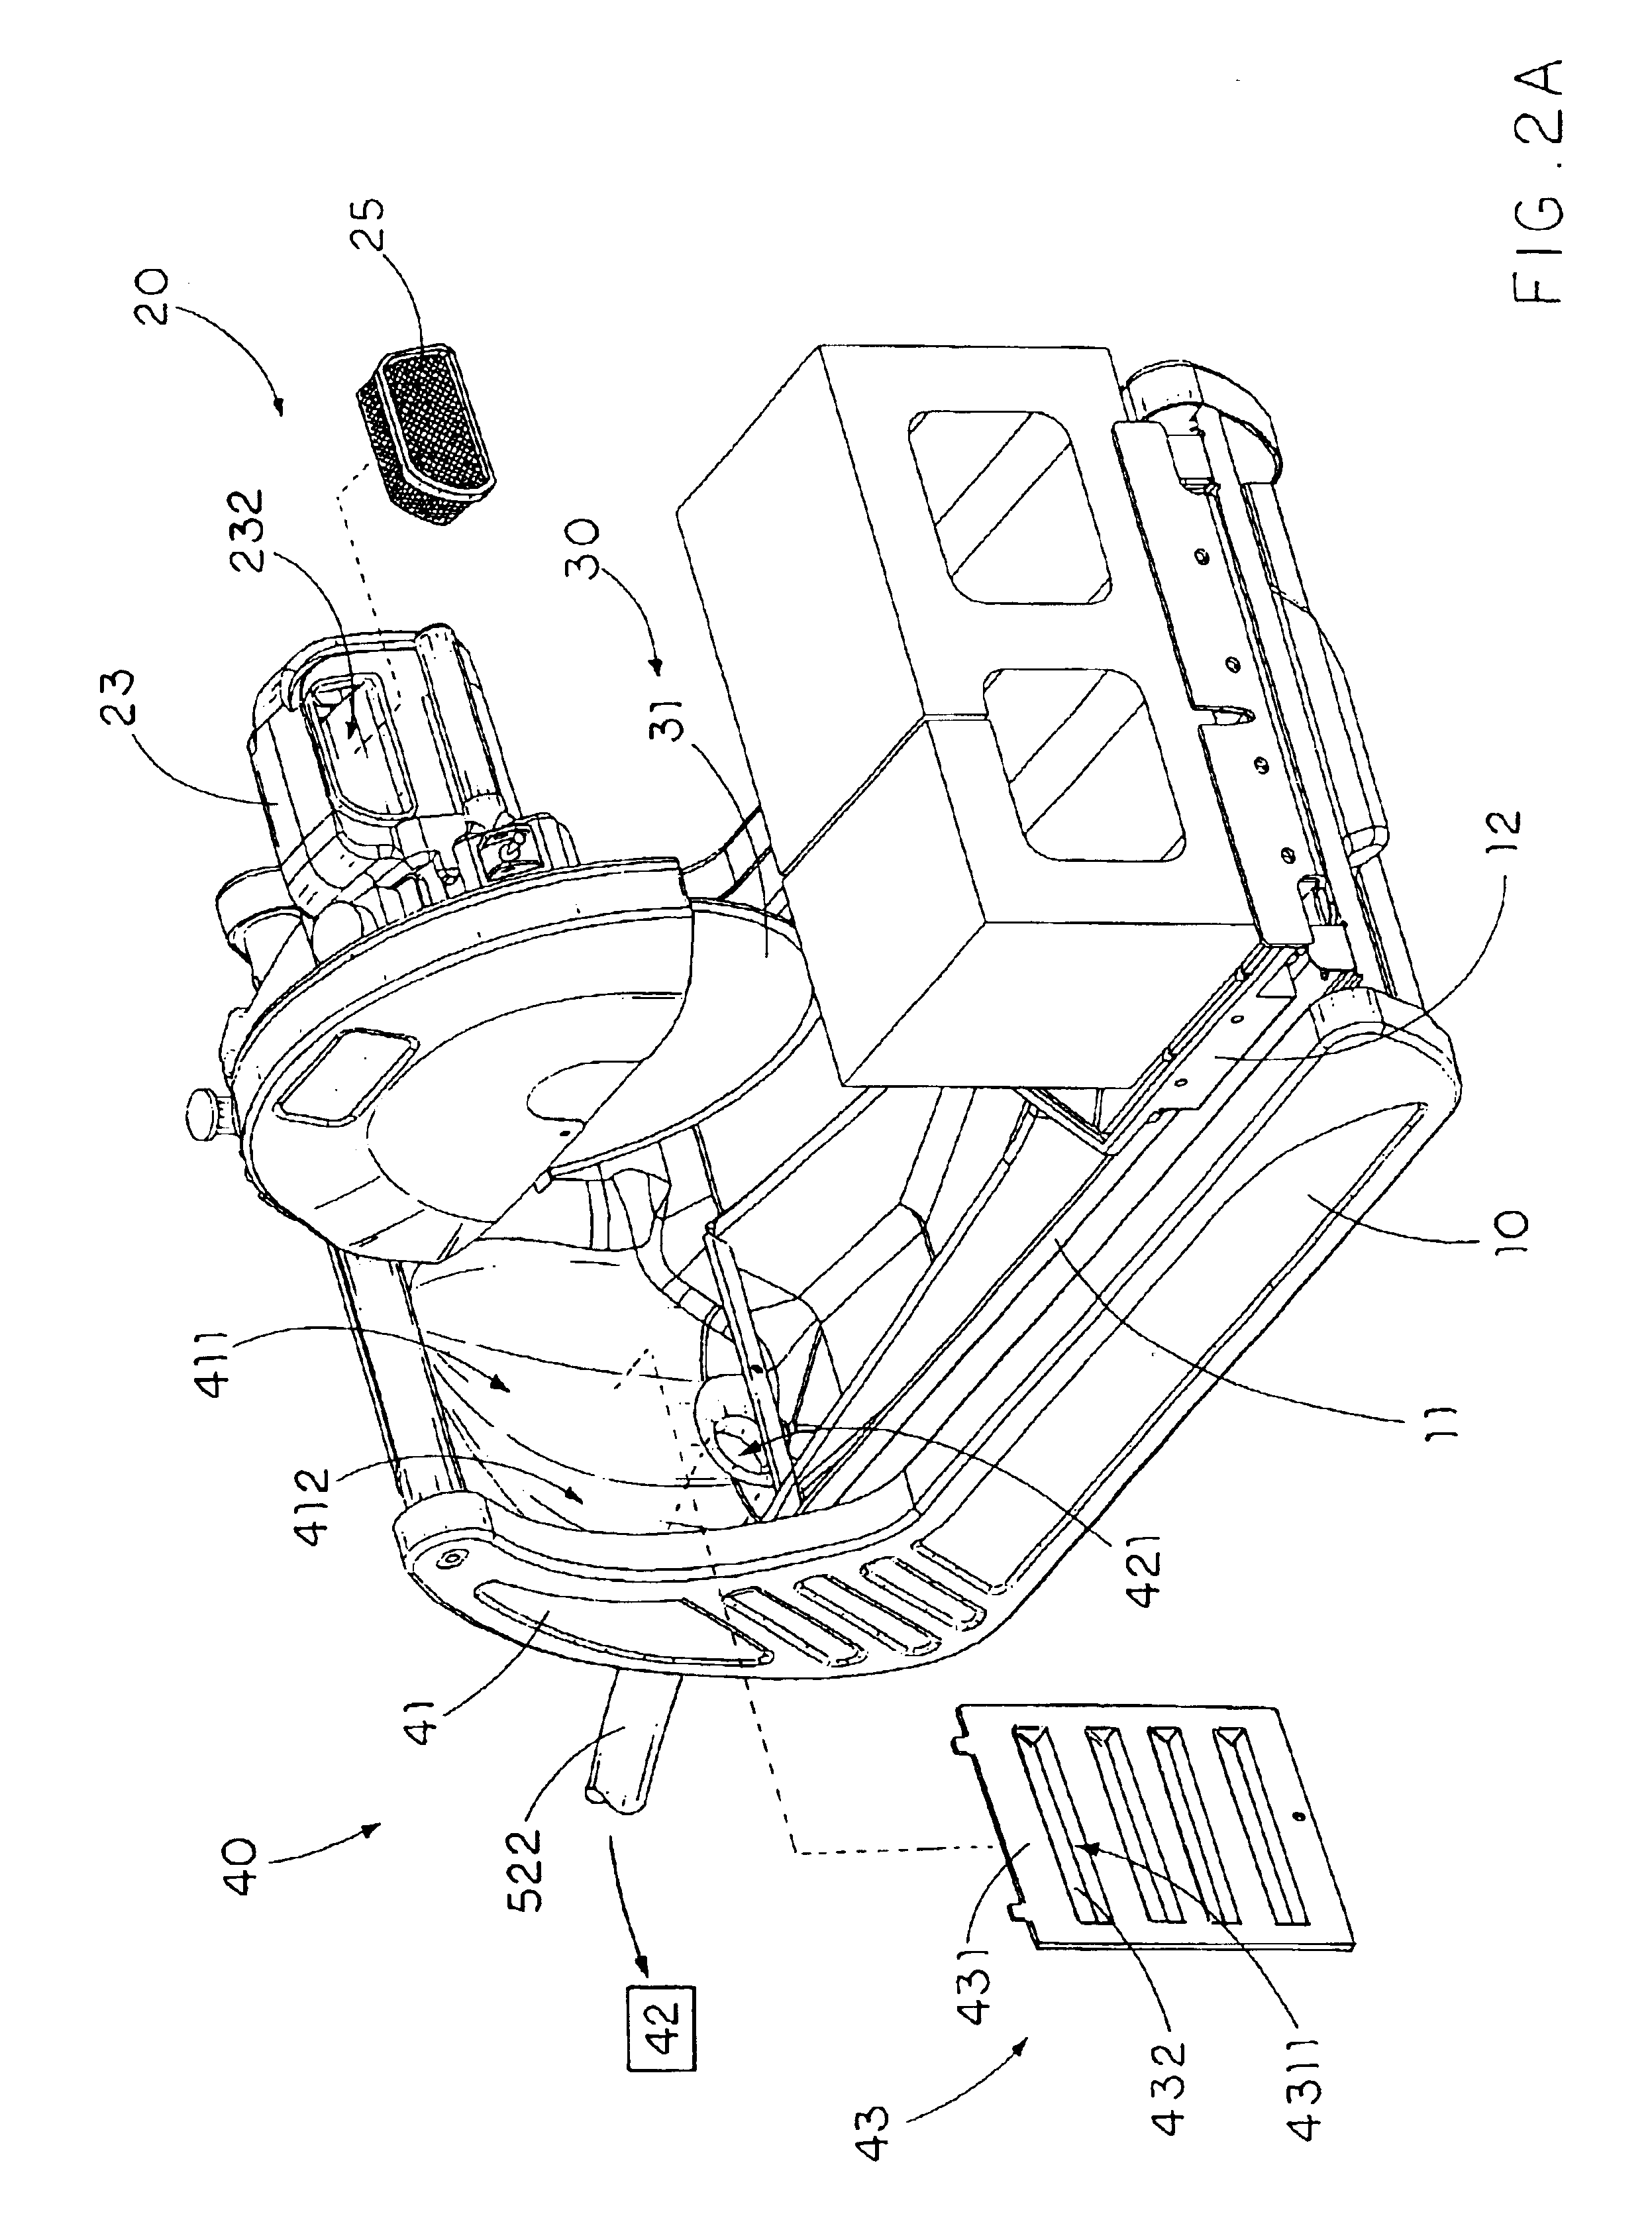 Cutting machine with environment control arrangement